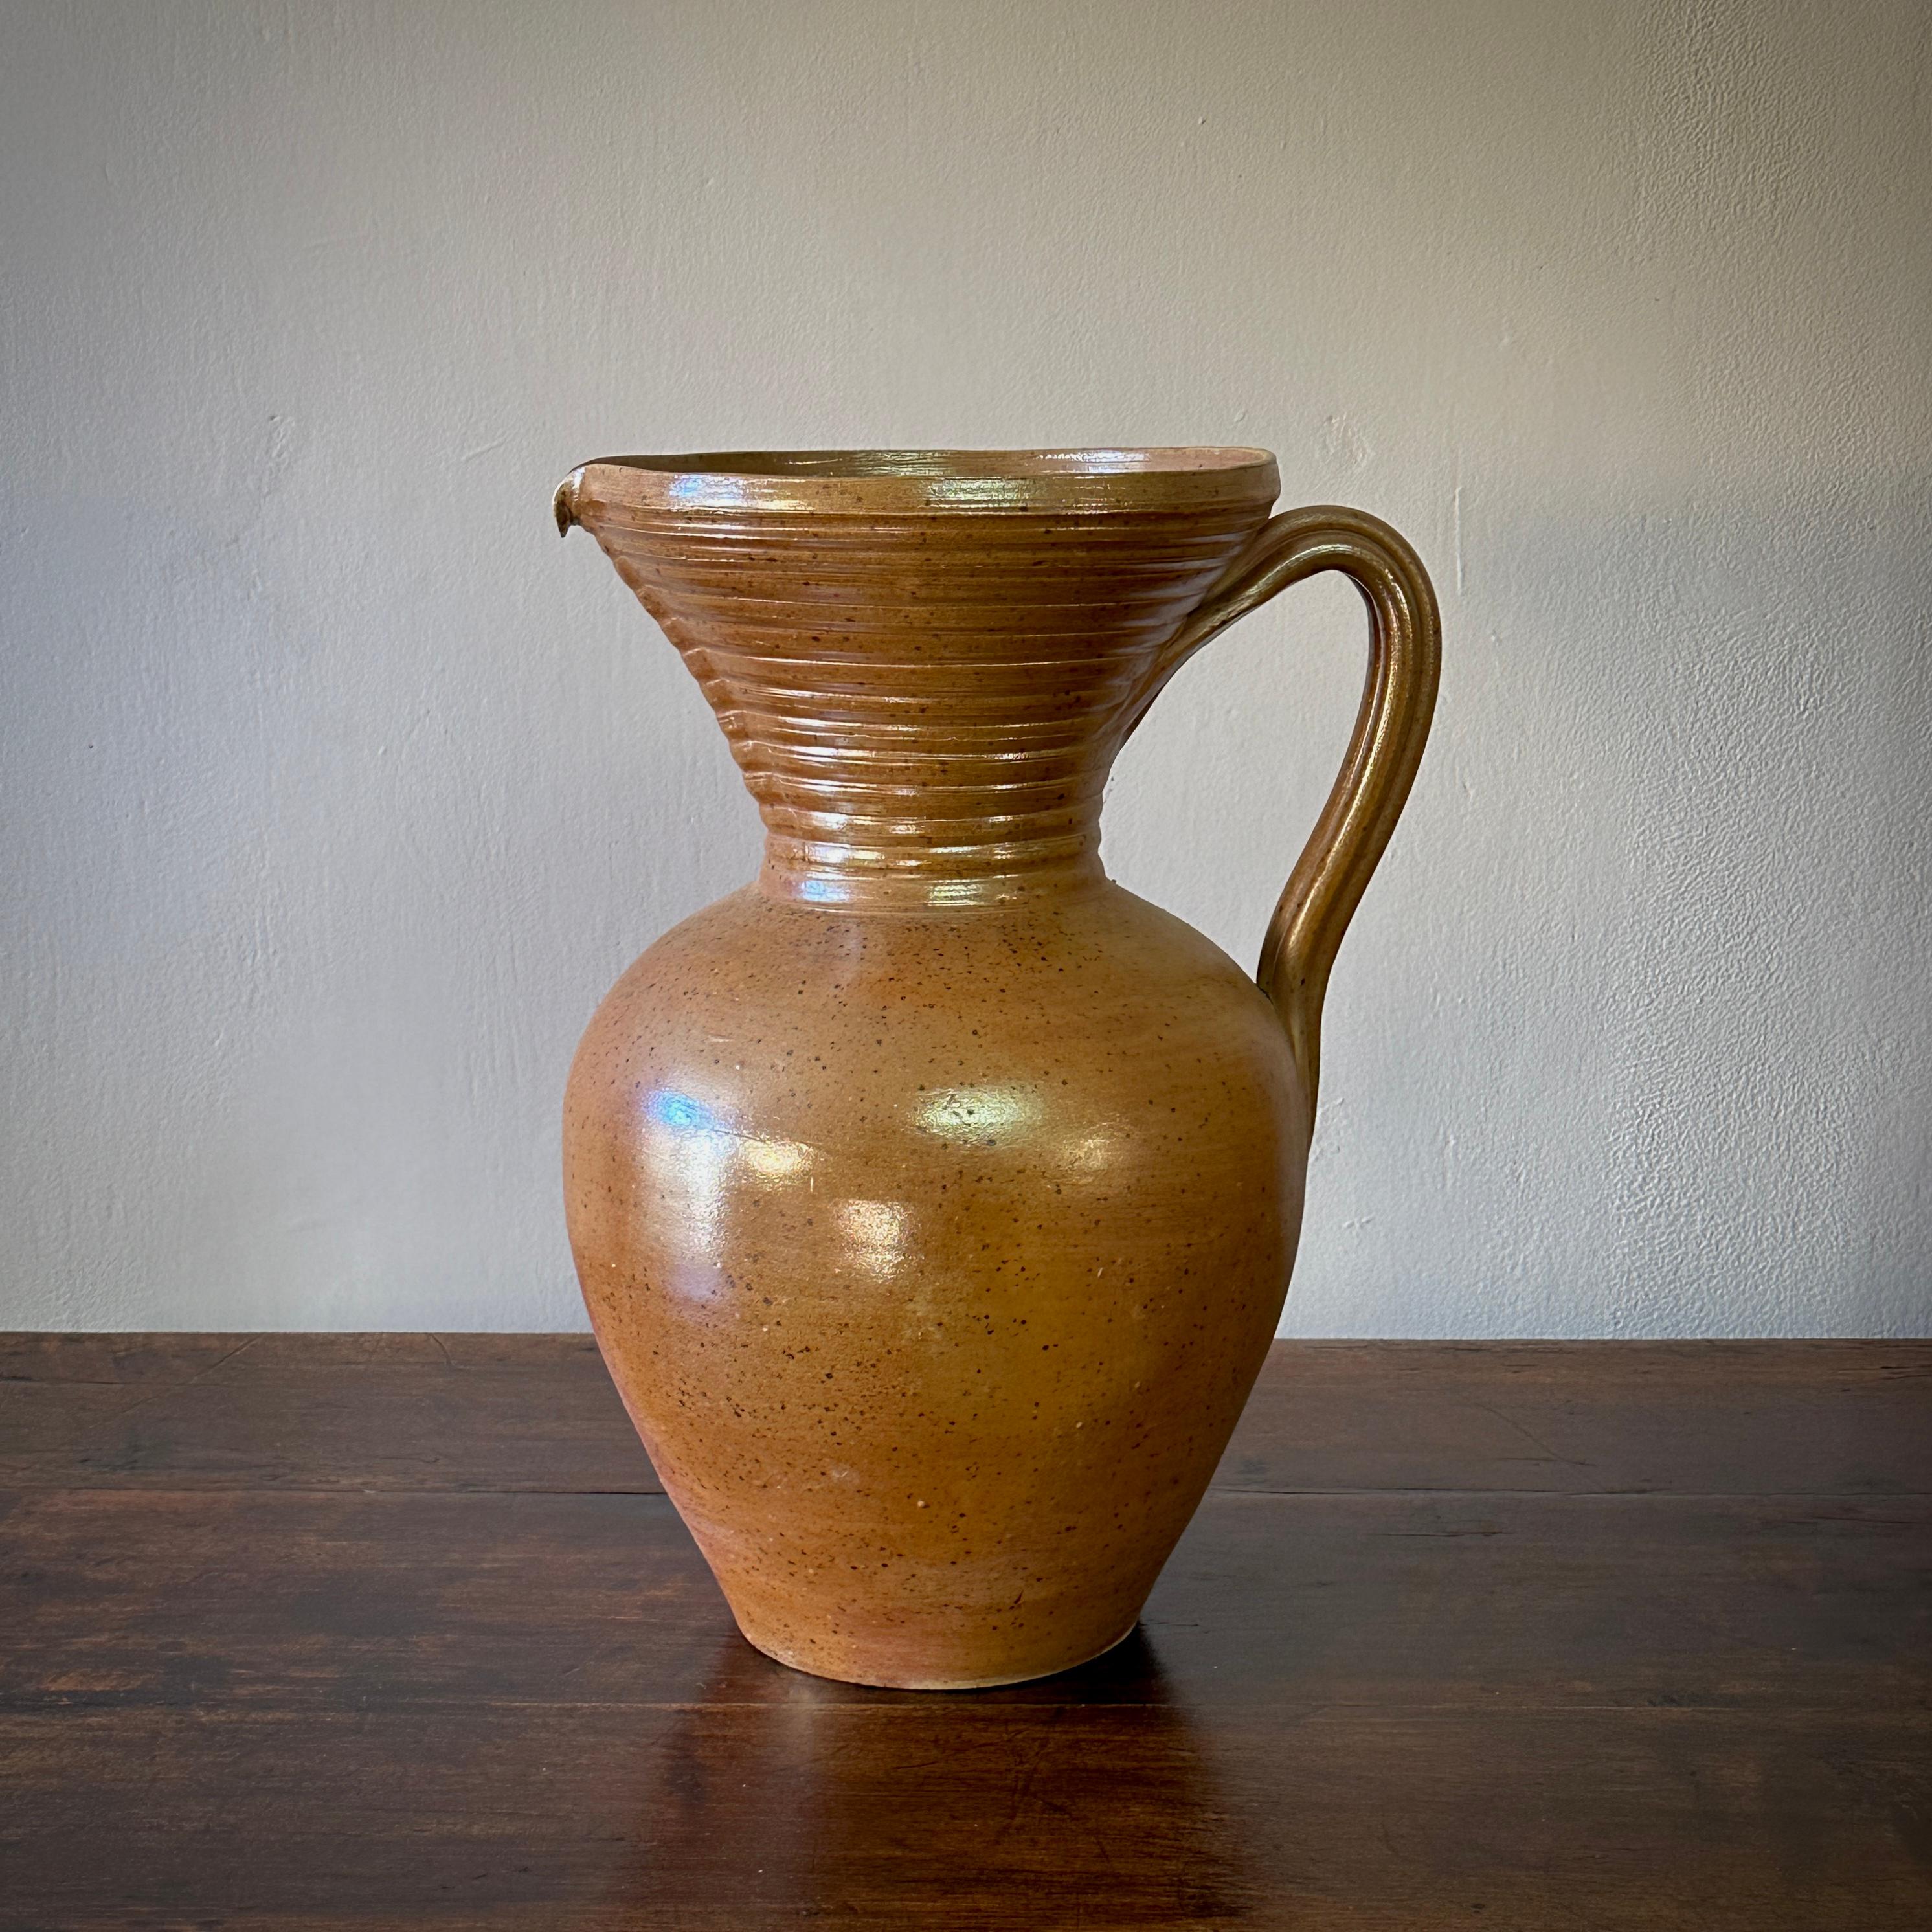 1960s earth-toned glazed ceramic pitcher With a glazed finish , this vessel is defined by a refined rusticity

France, circa 1960

Dimensions: 16.5W x 14.5D x 20.5H